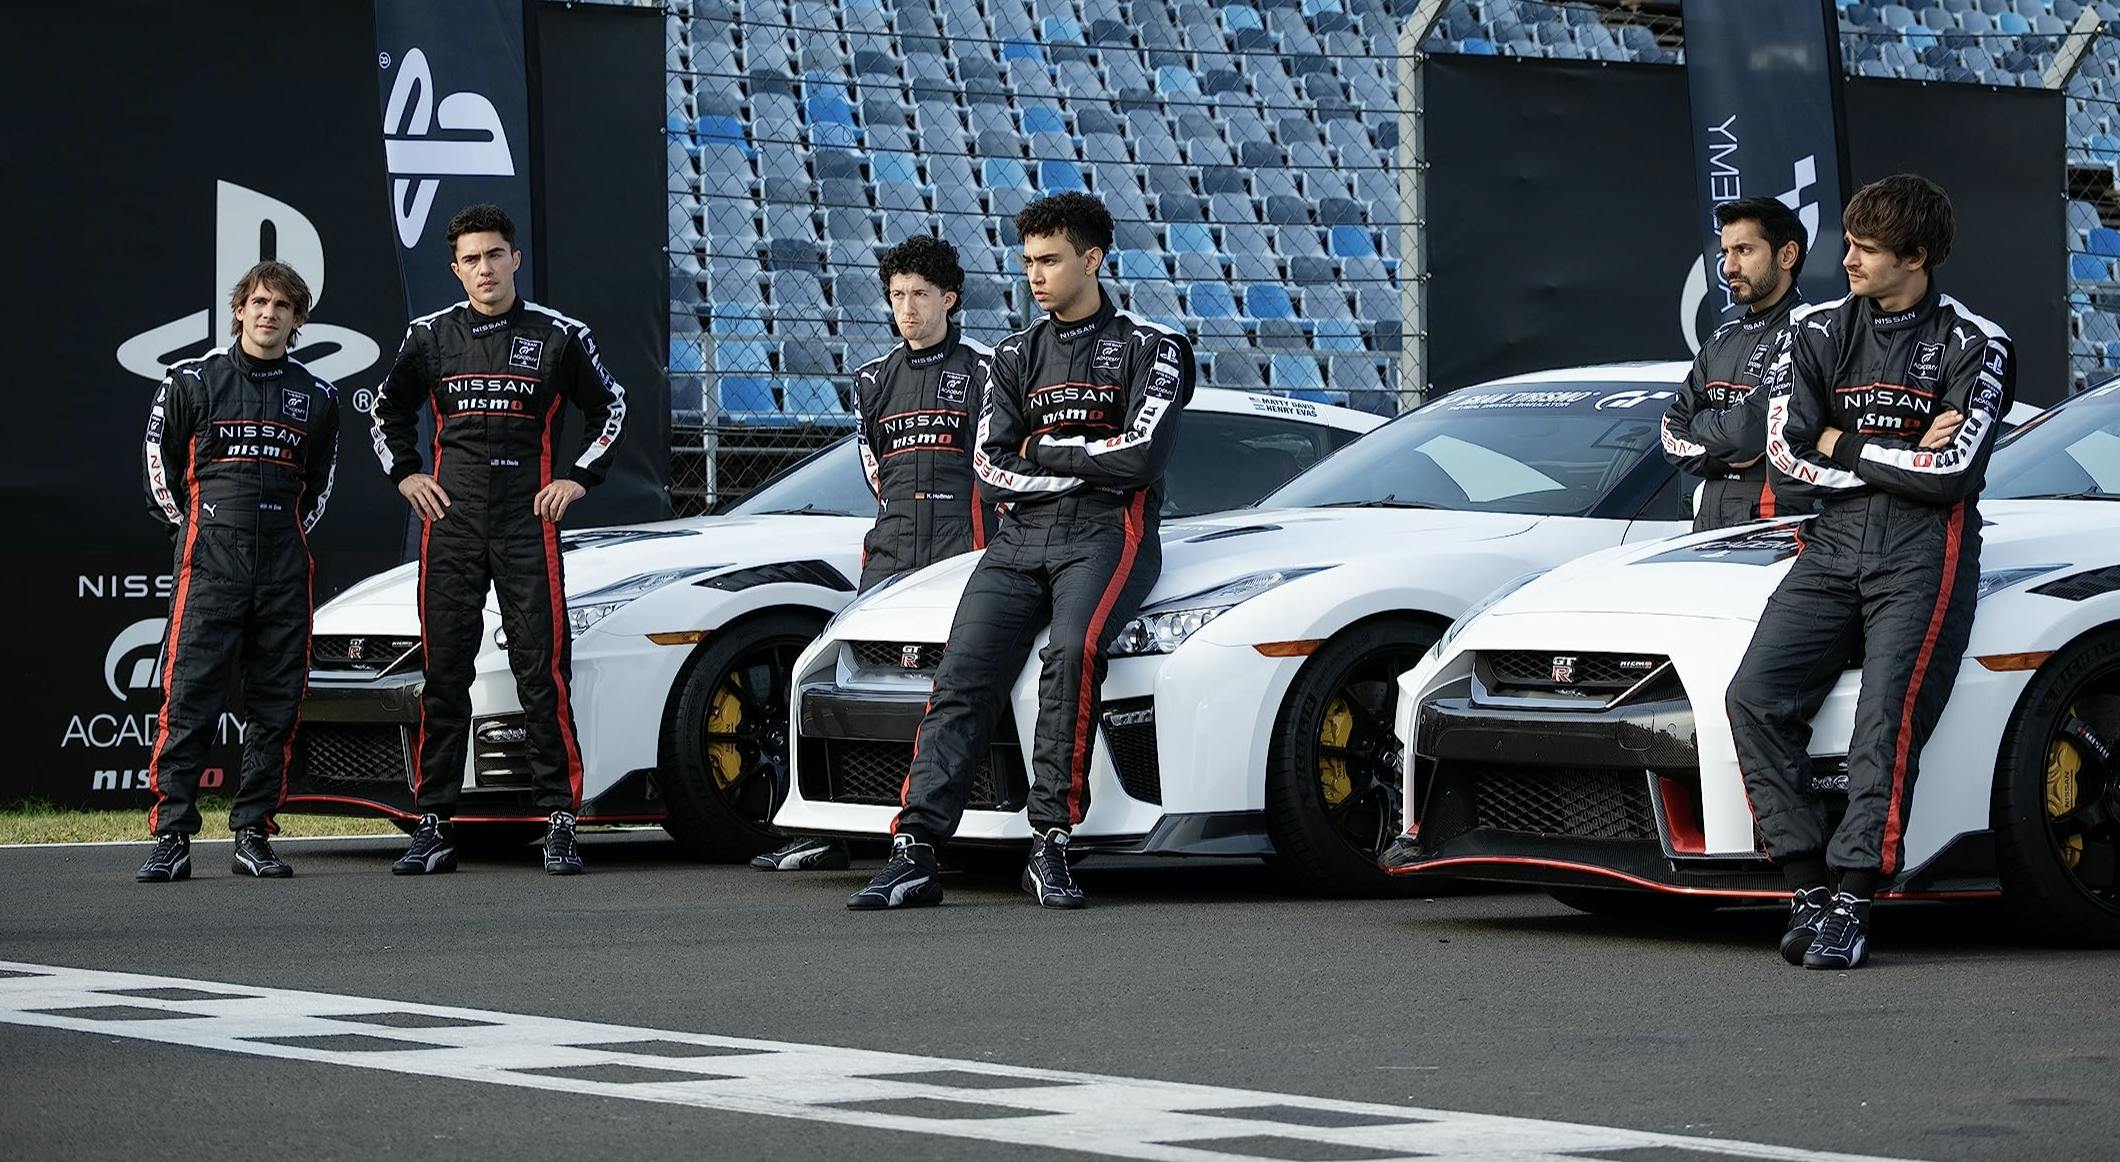 Nissan executive tells the real story behind the new Gran Turismo